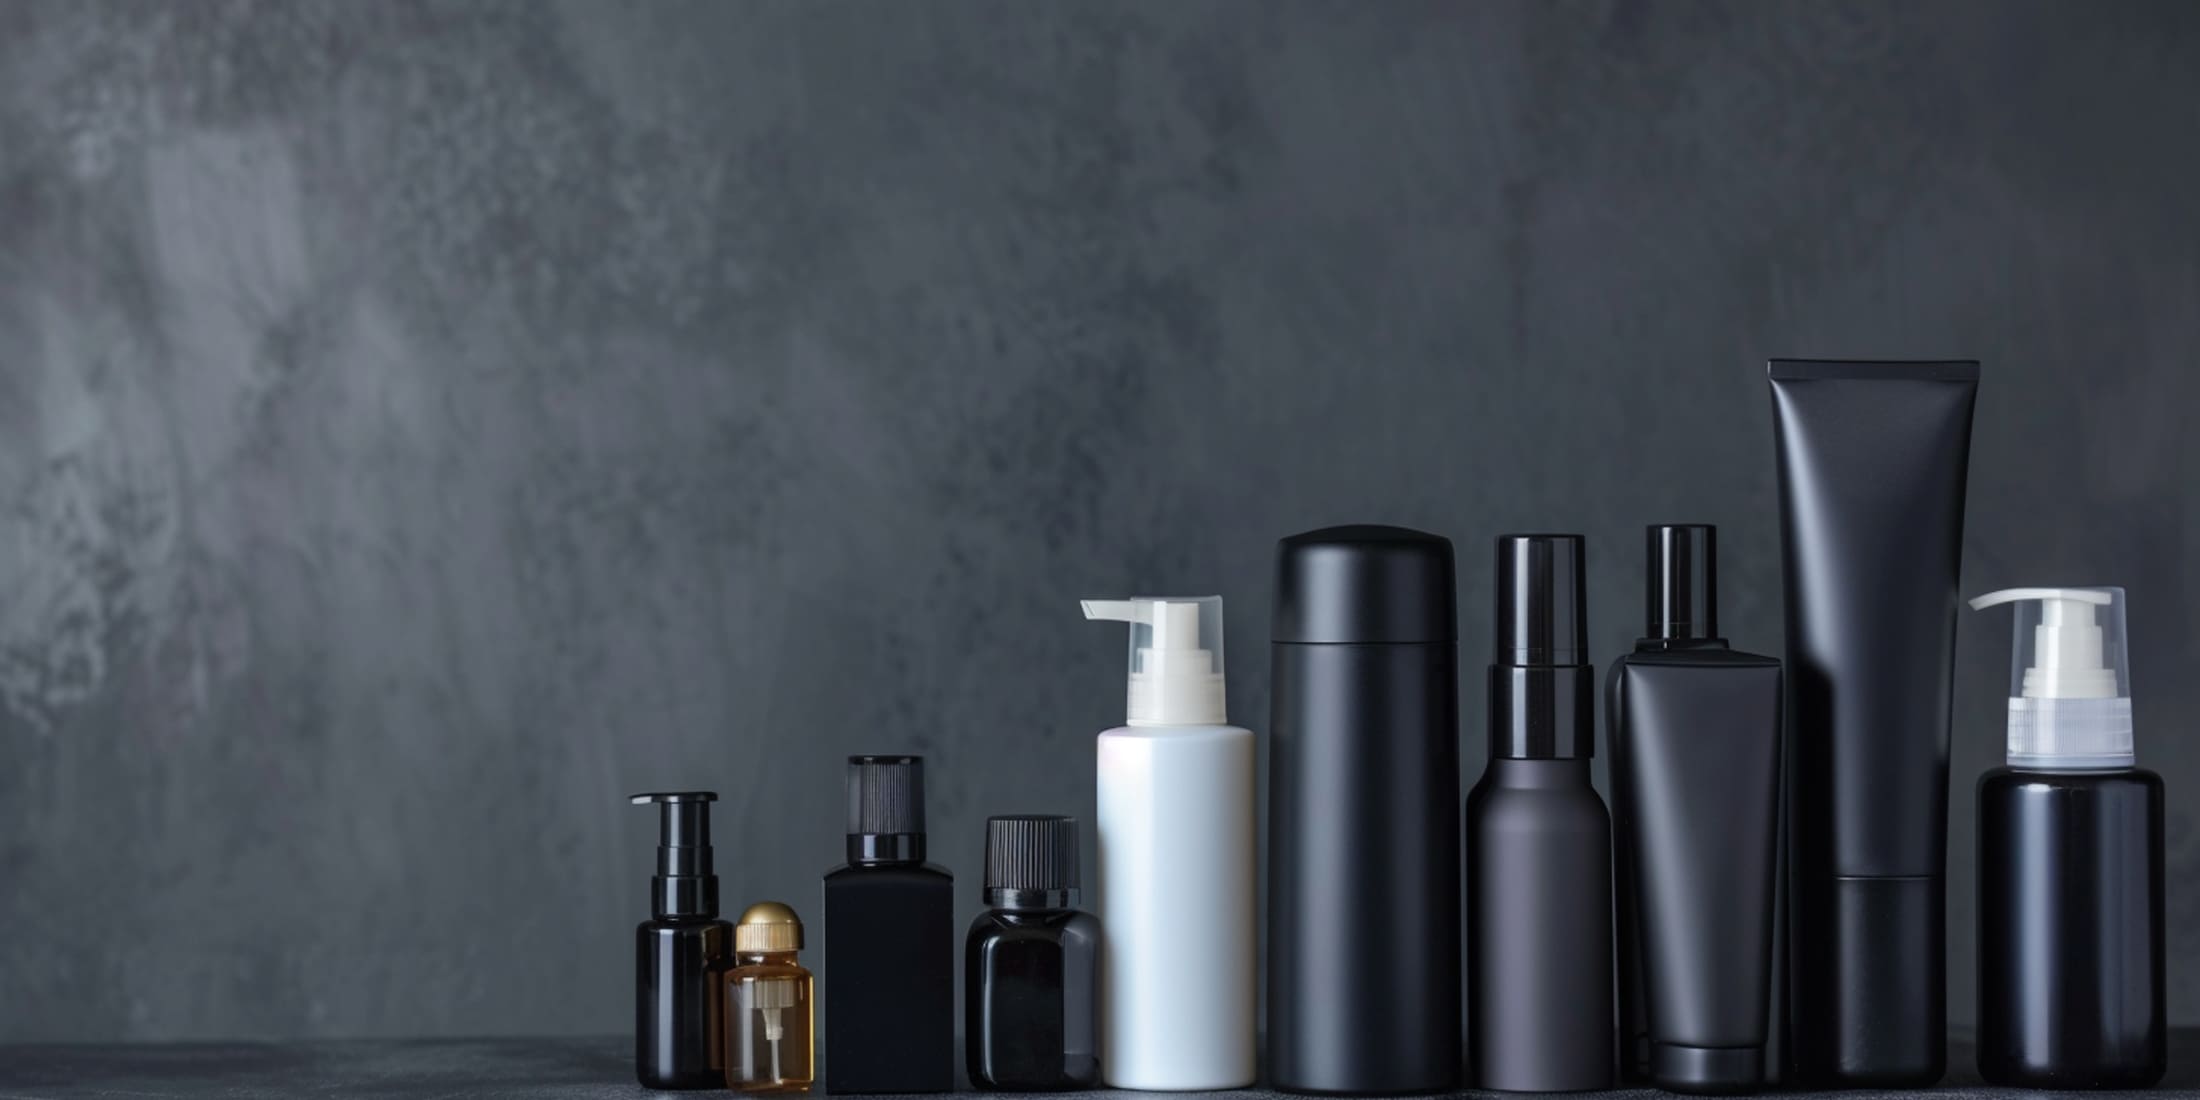 a load of men's hair products which help style low fades and high fades